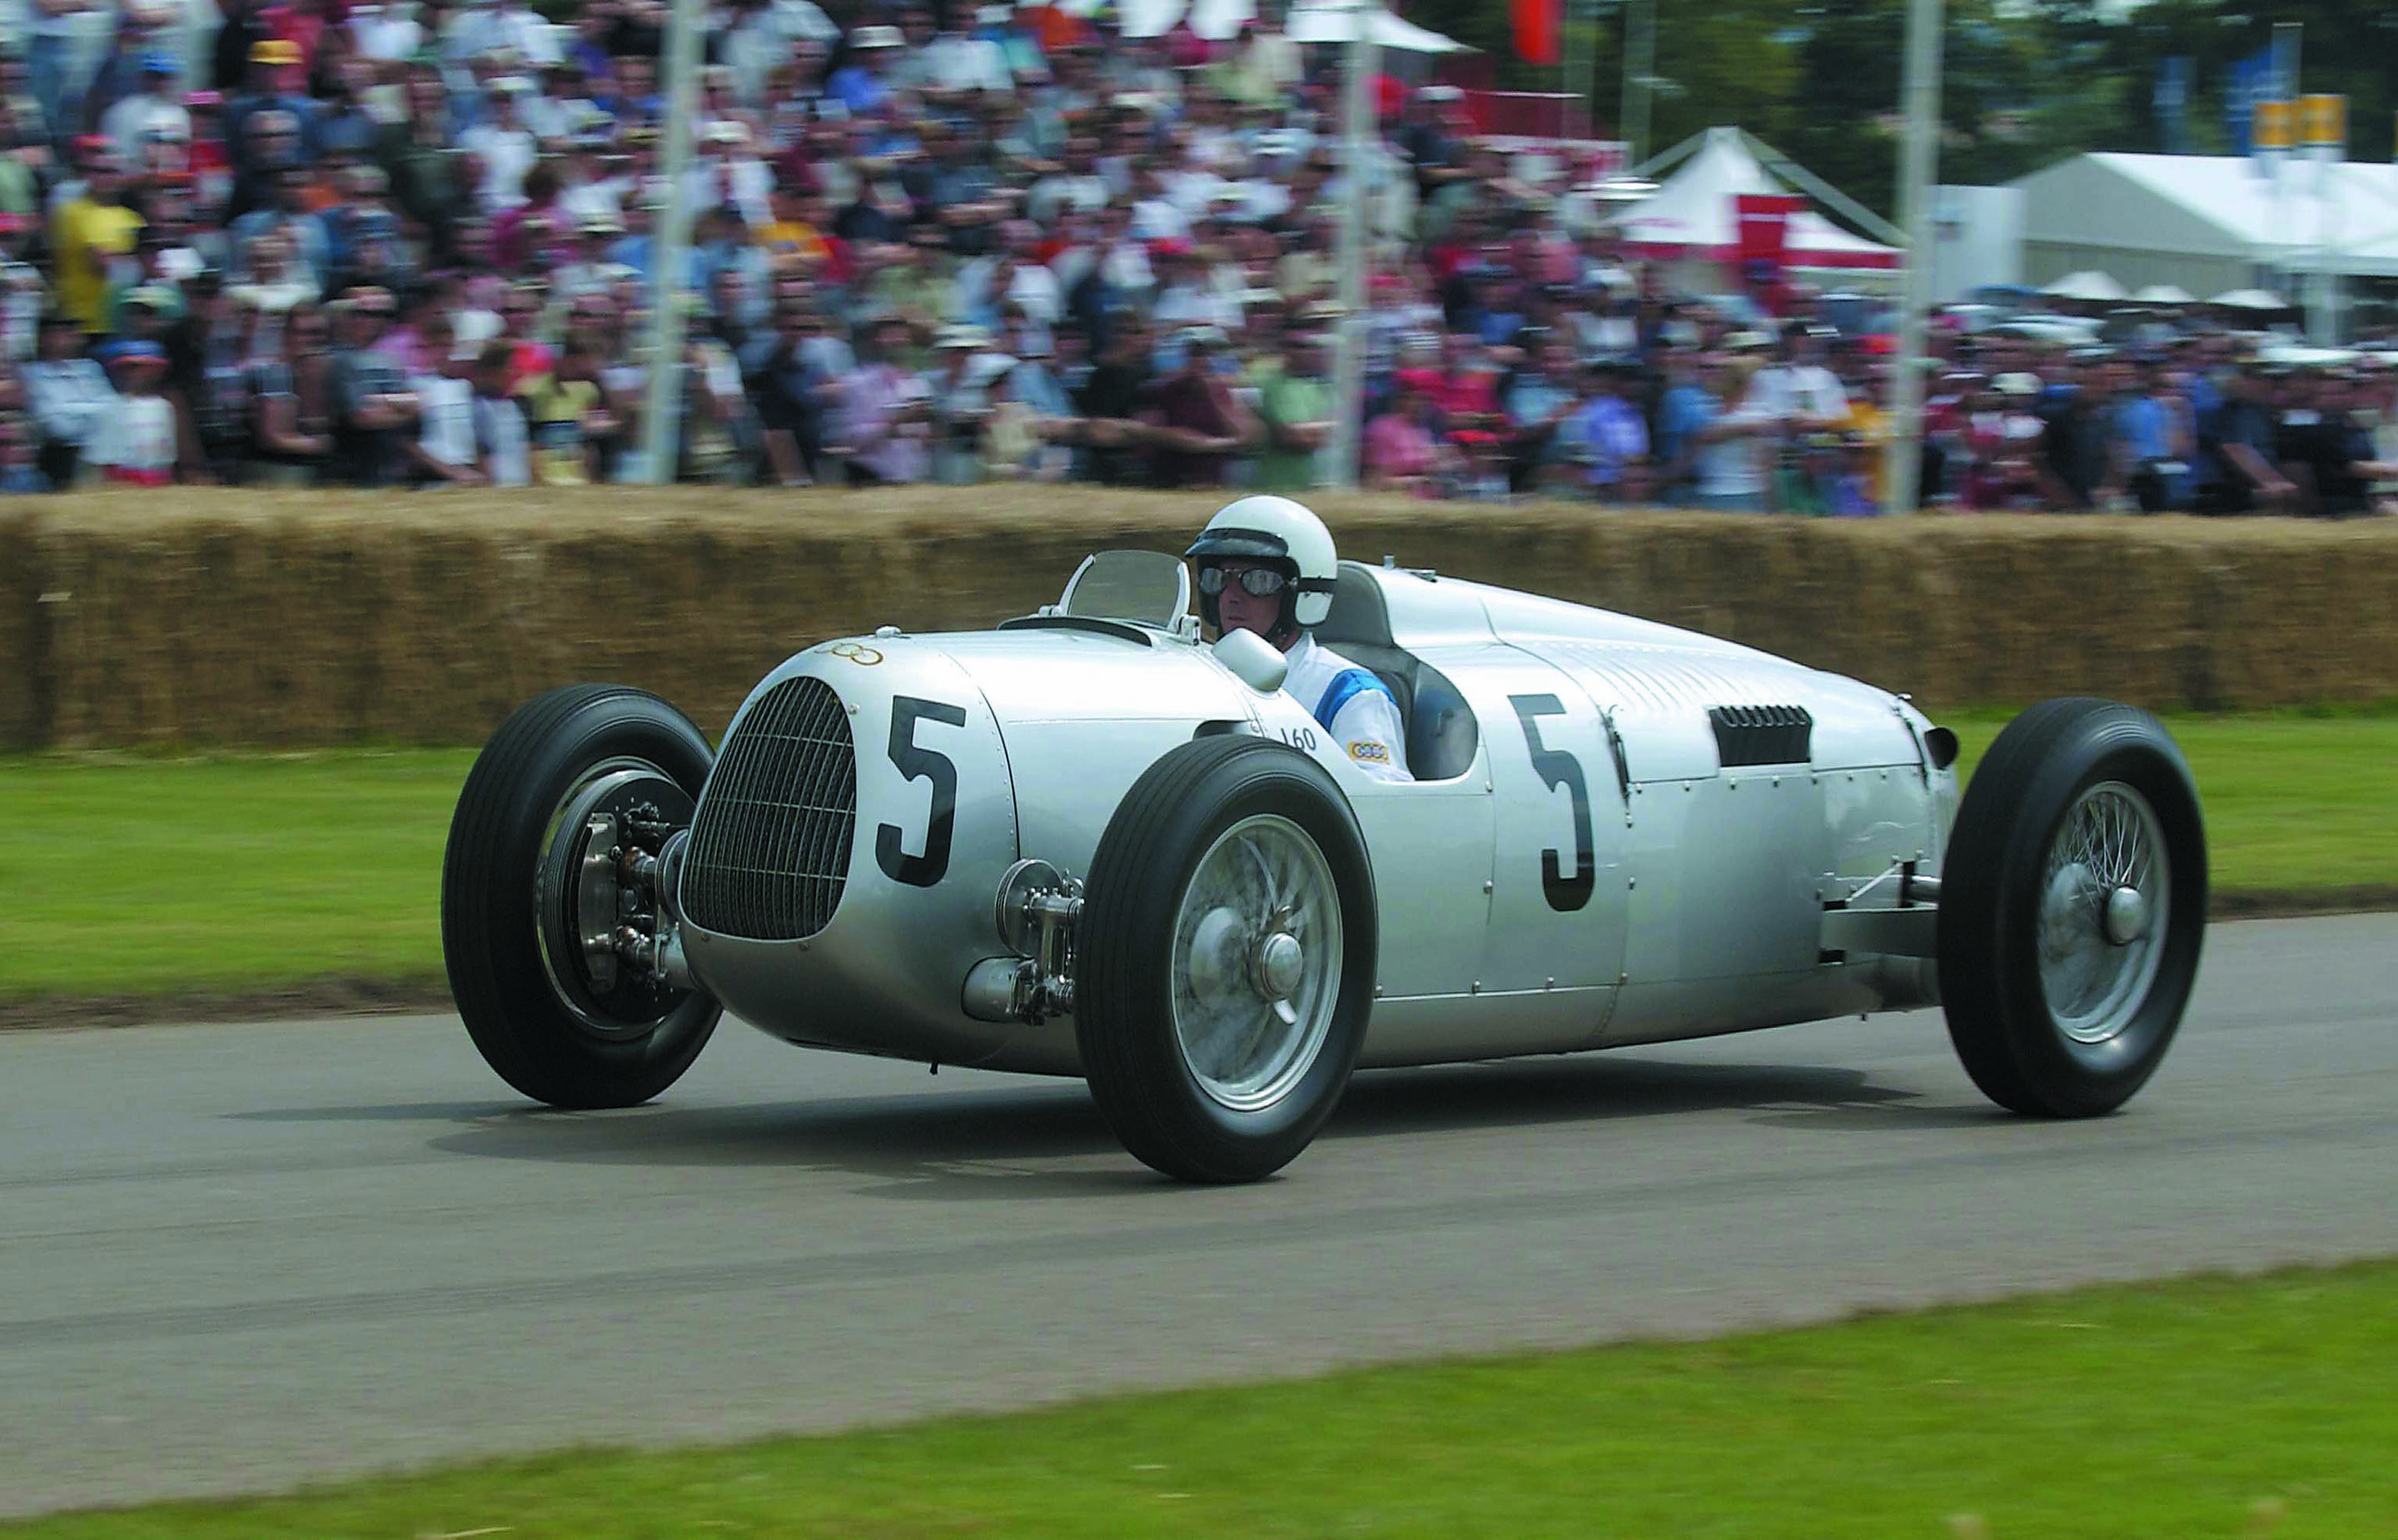 Auto Union C-type V-16 engine (1936) at the Goodwood Festival of Speed (12-14 July, 2002)